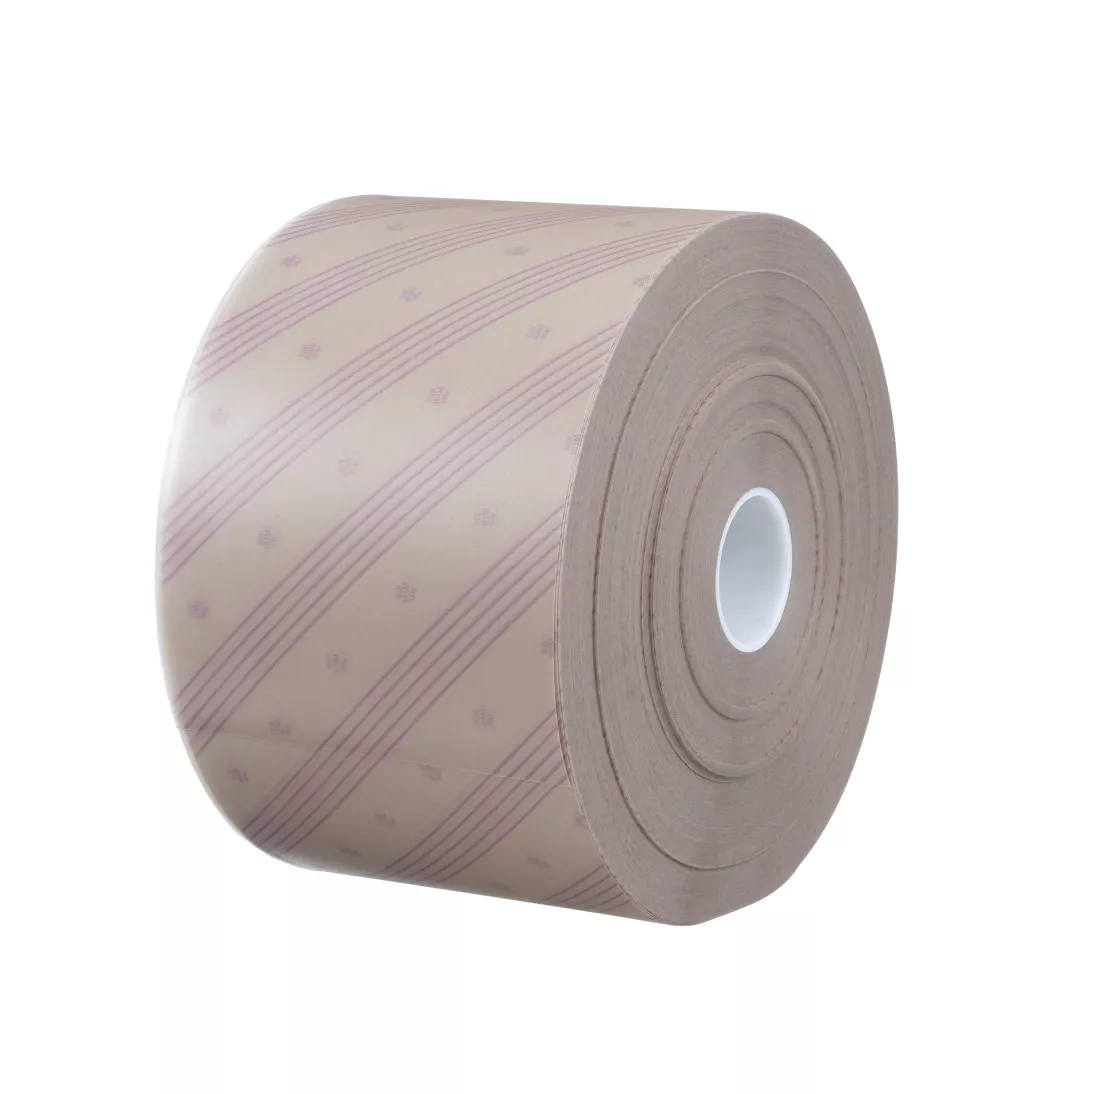 3M™ Optical Film Roll 361M, 15 Mic 3MIL, 9 in x 1476 ft x 3 in, PCOR,
ASO, 1 ea/Case, Restricted